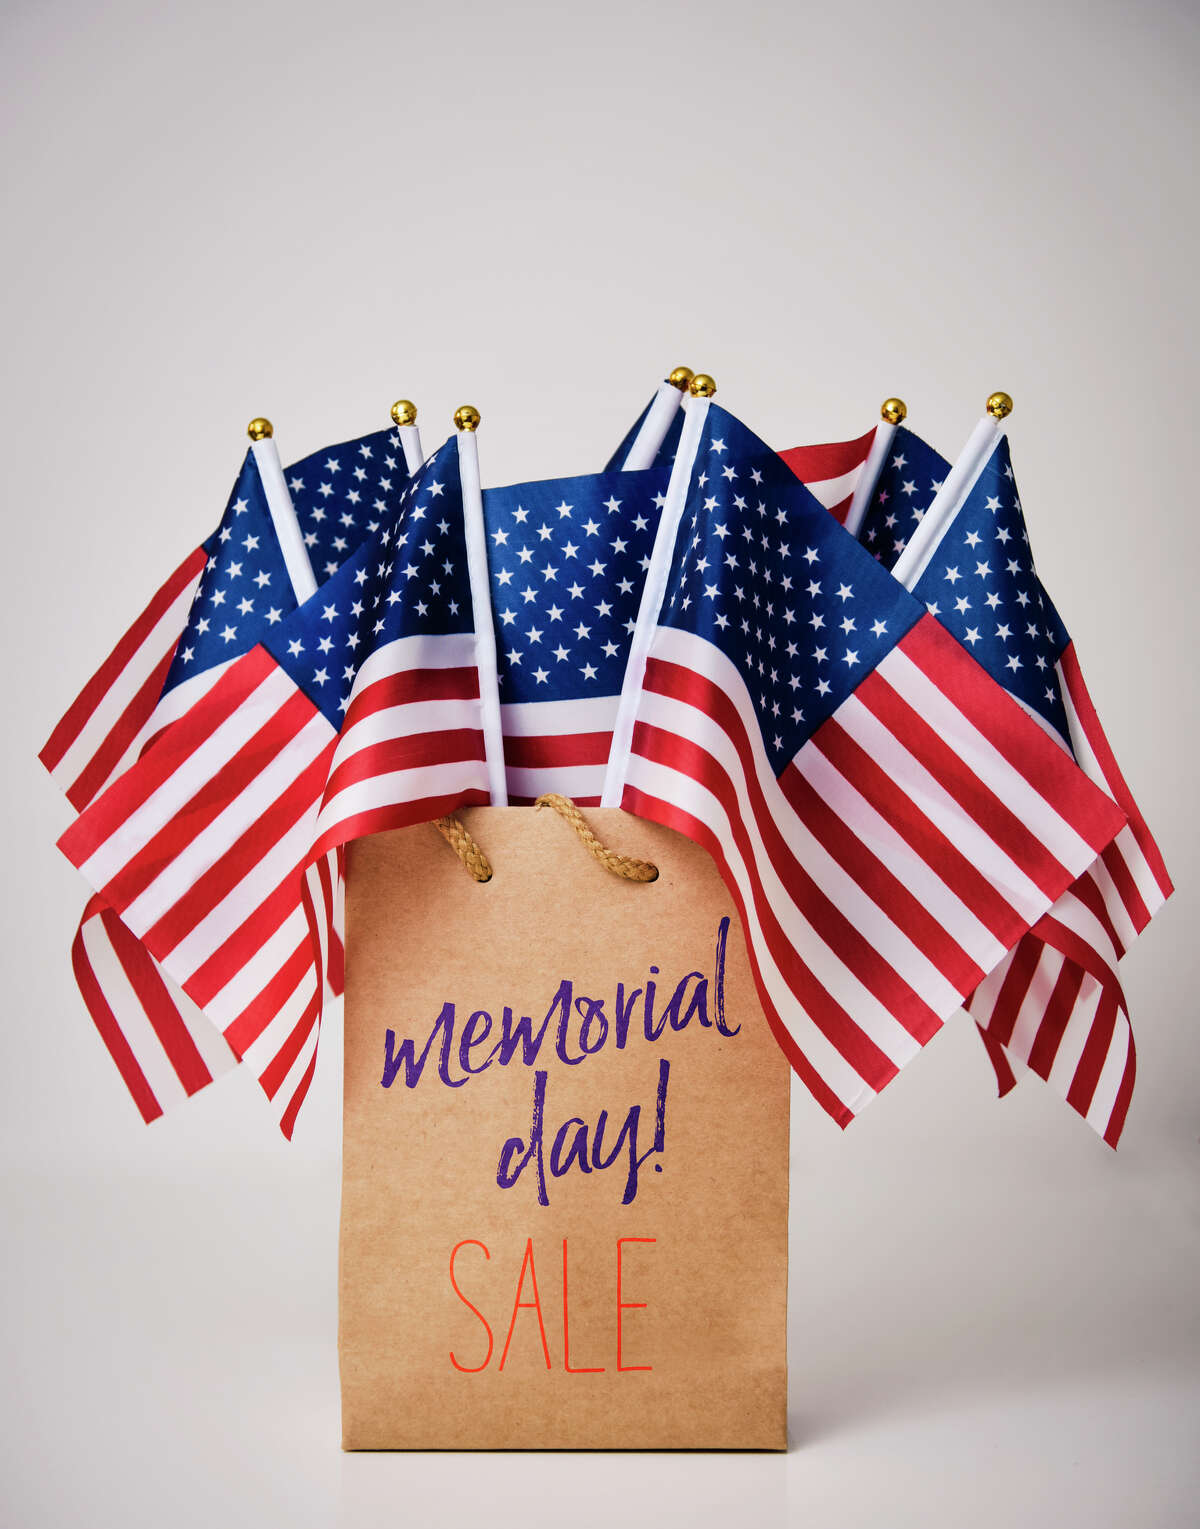 Memorial Day weekend shopping deals and duds